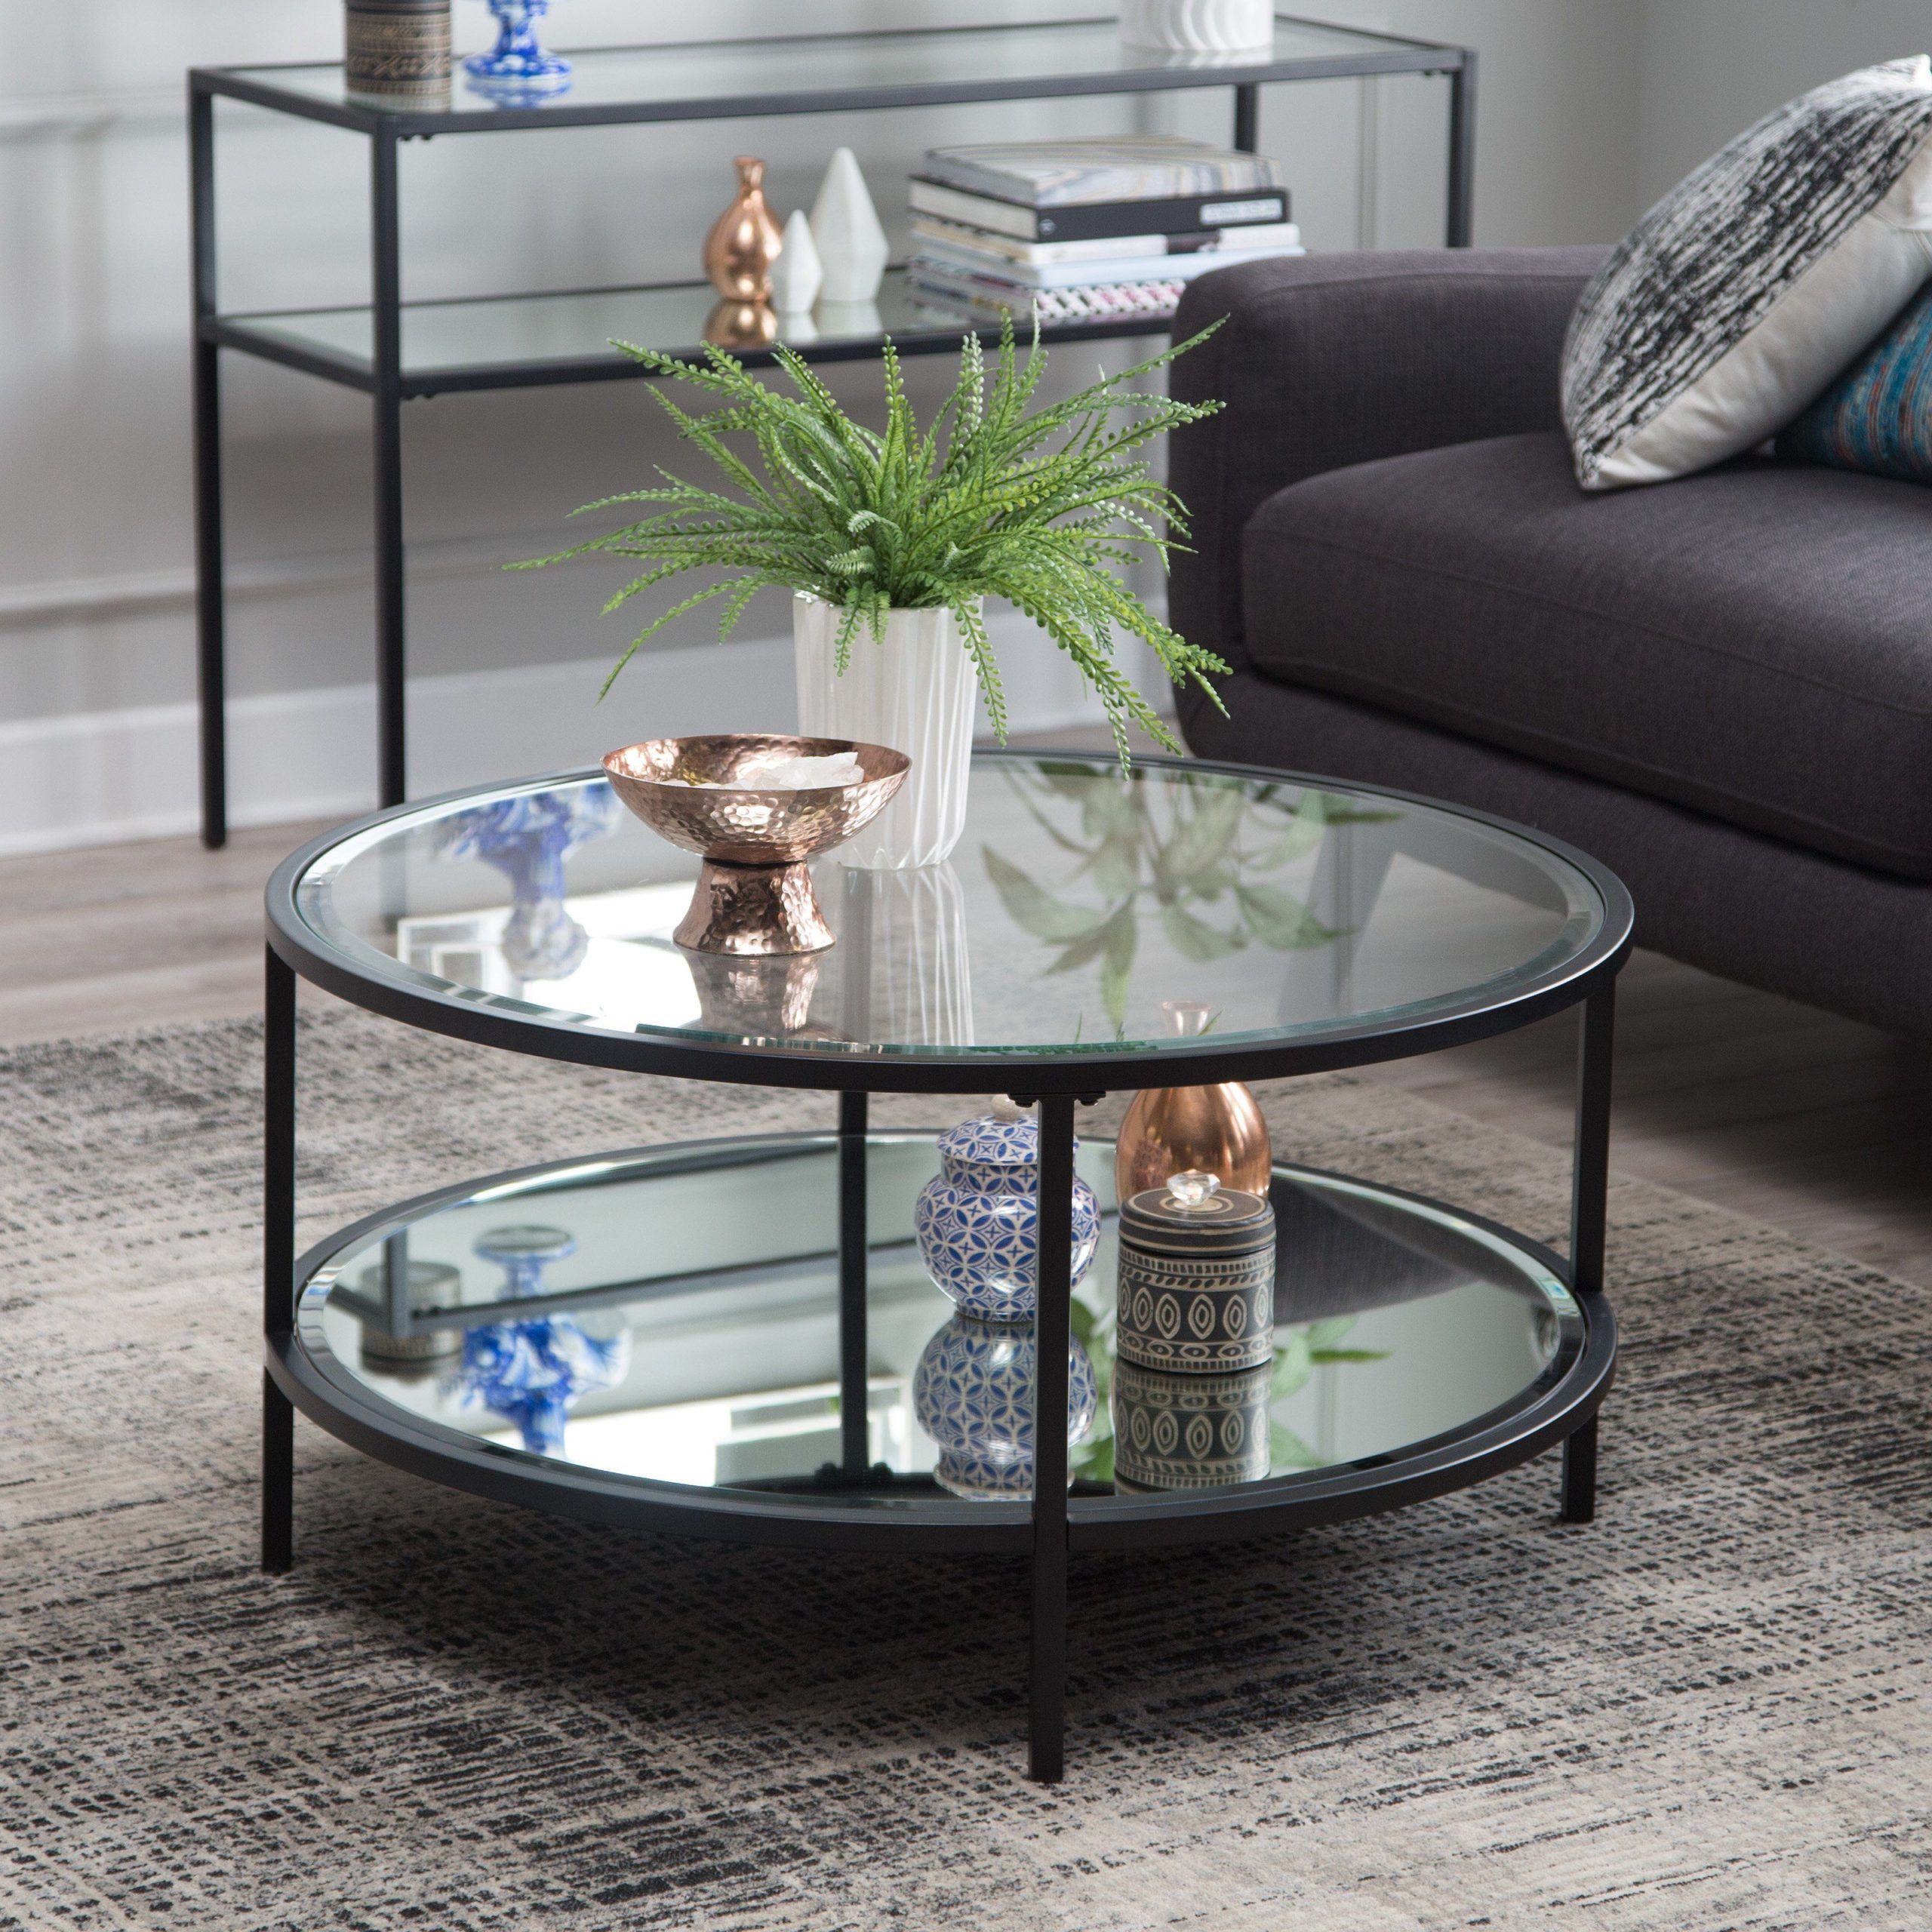 Widely Used Full Black Round Coffee Tables Intended For Belham Living Lamont Round Coffee Table – Black (View 6 of 15)